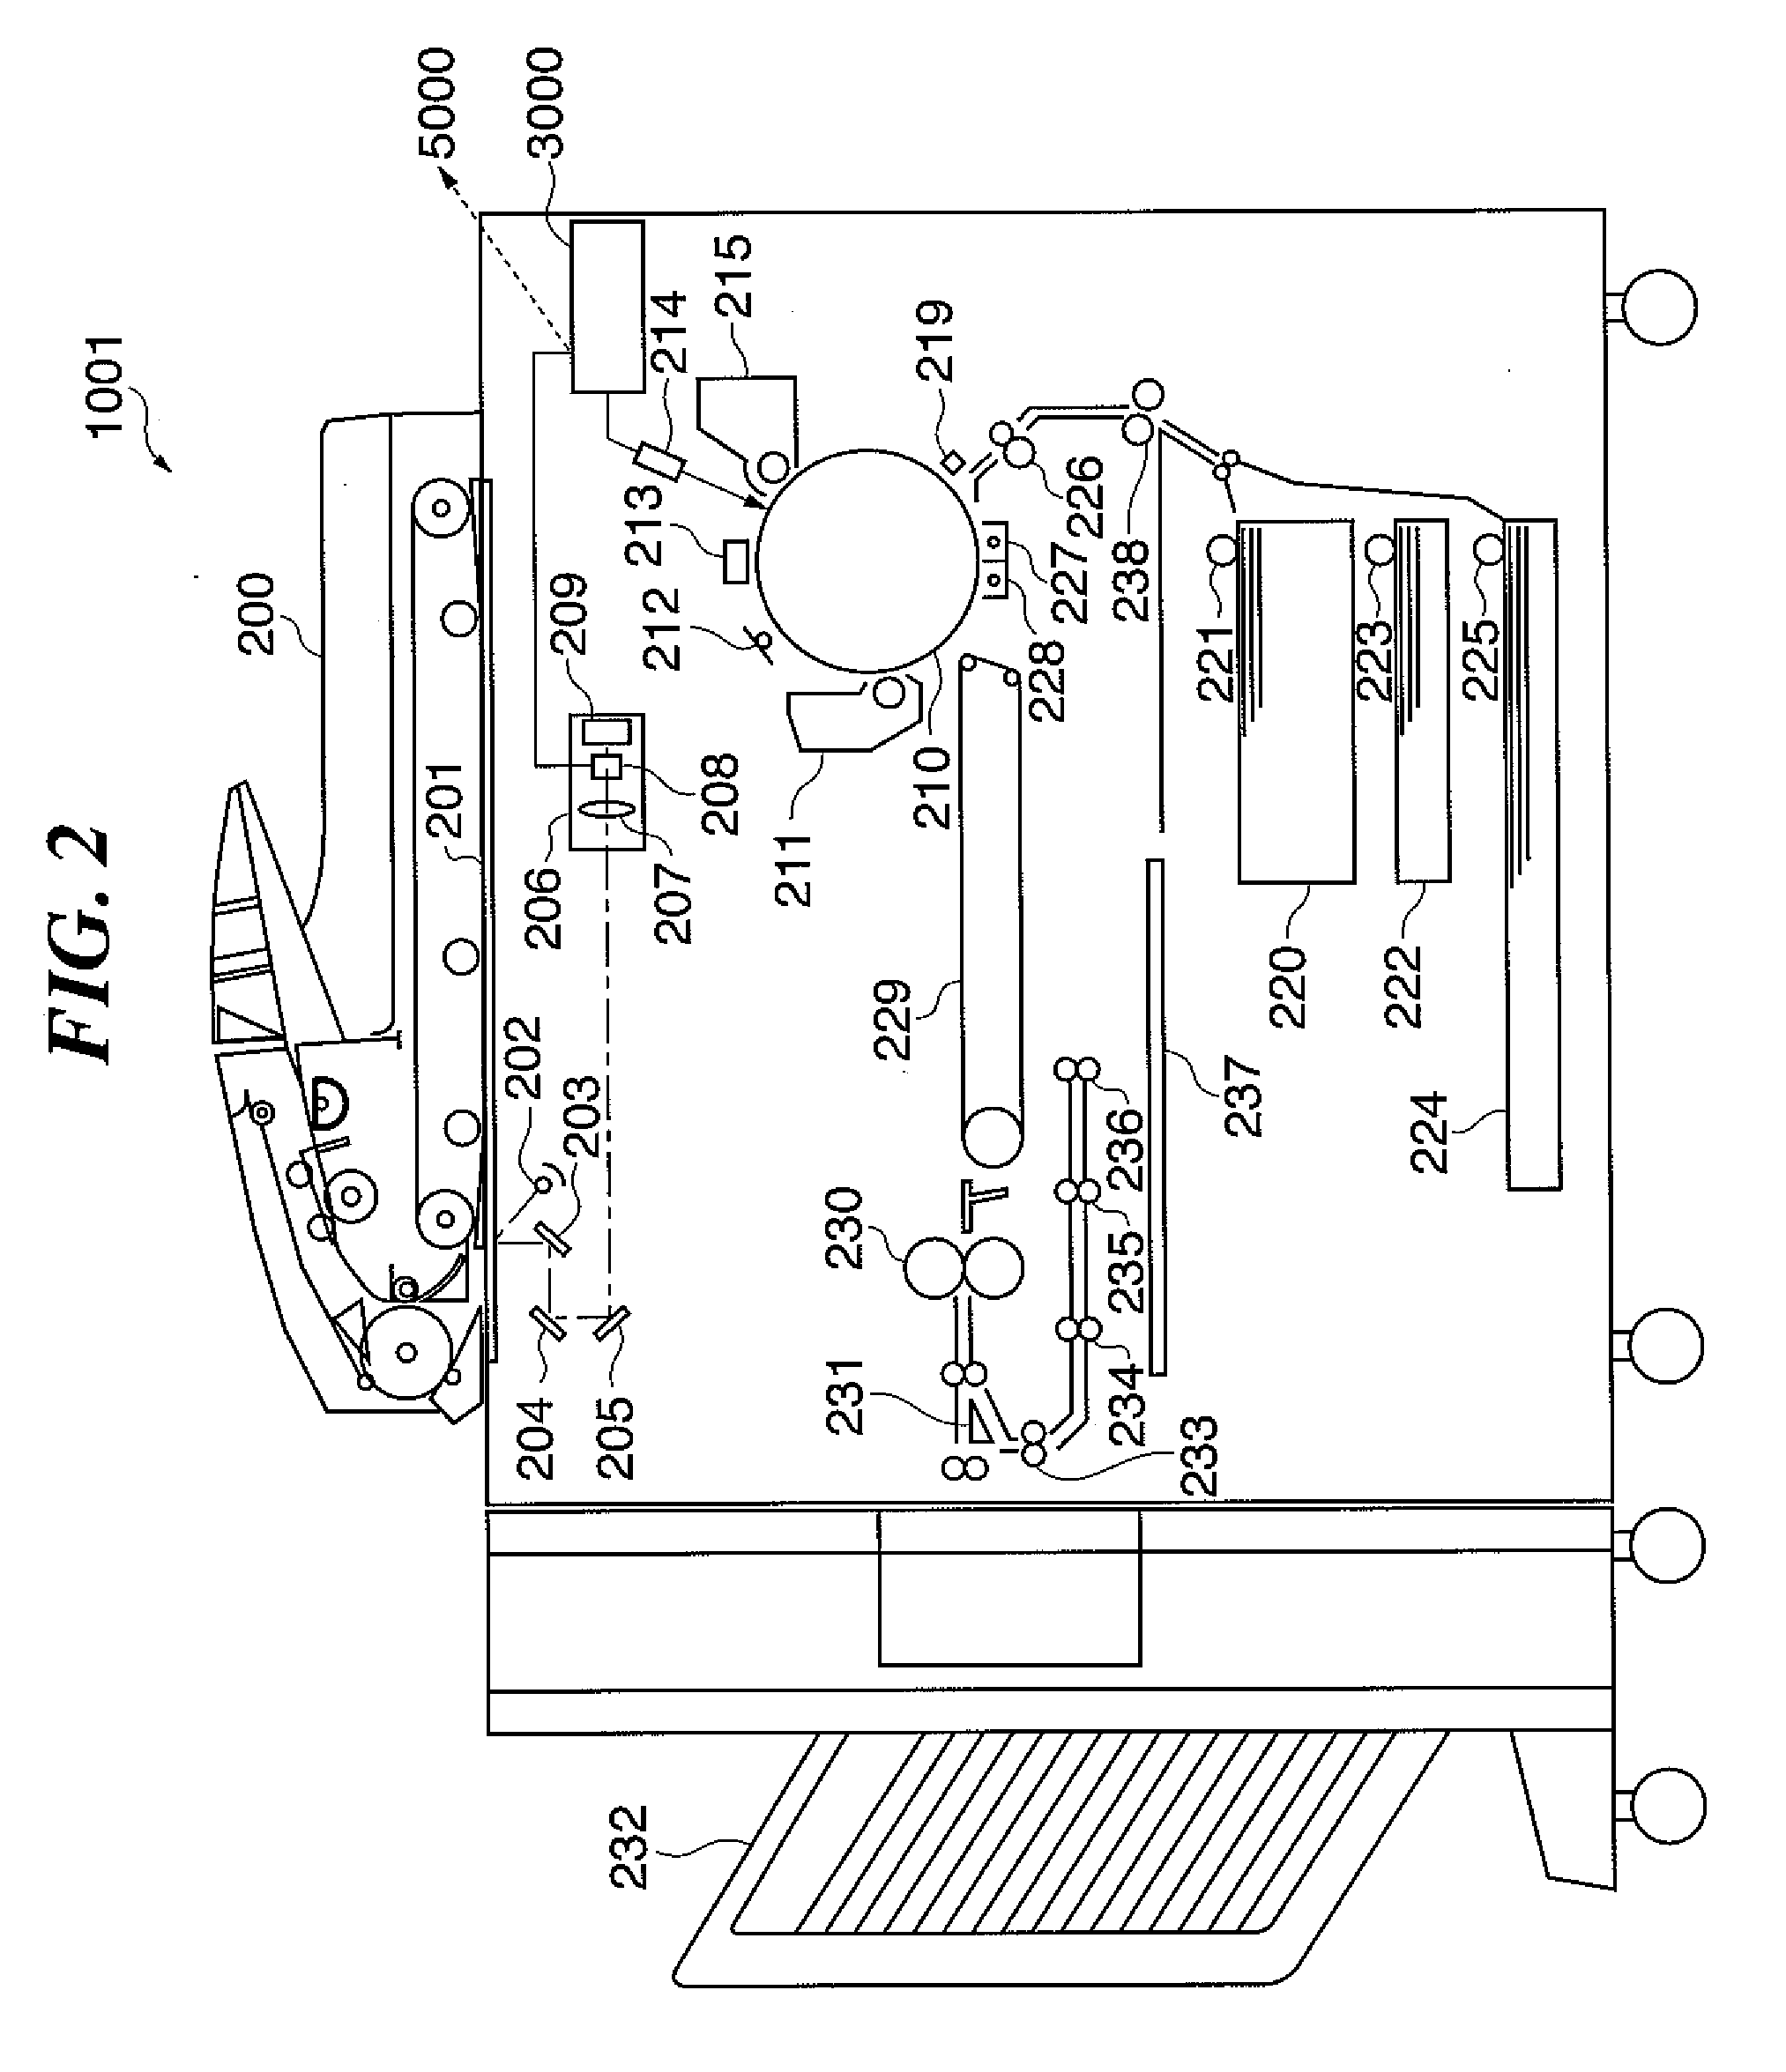 Image data search system, image data search apparatus, and image data search method, computer program for implementing the method, and storage medium storing the computer program